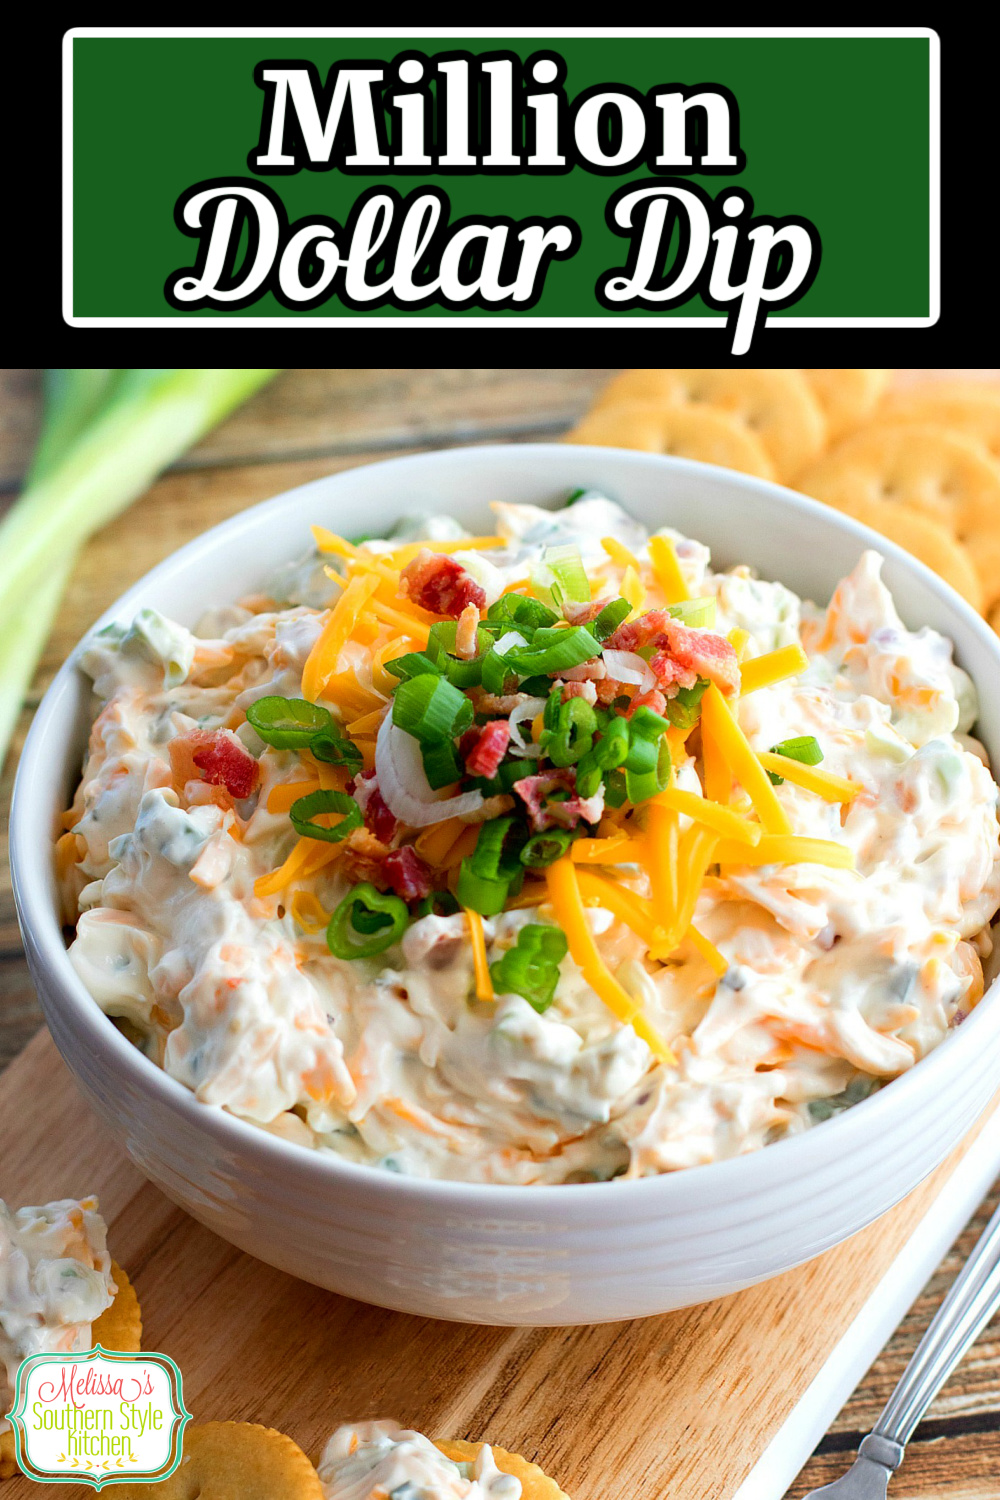 Million Dollar Dip is perfect for year-round snacking #milliondollardip #diprecipes #appetizer #bacondip #easyrecipes #partyfood #tailgating #recipes #southernfood #southernrecipes #gamedayfood #superbowlfood